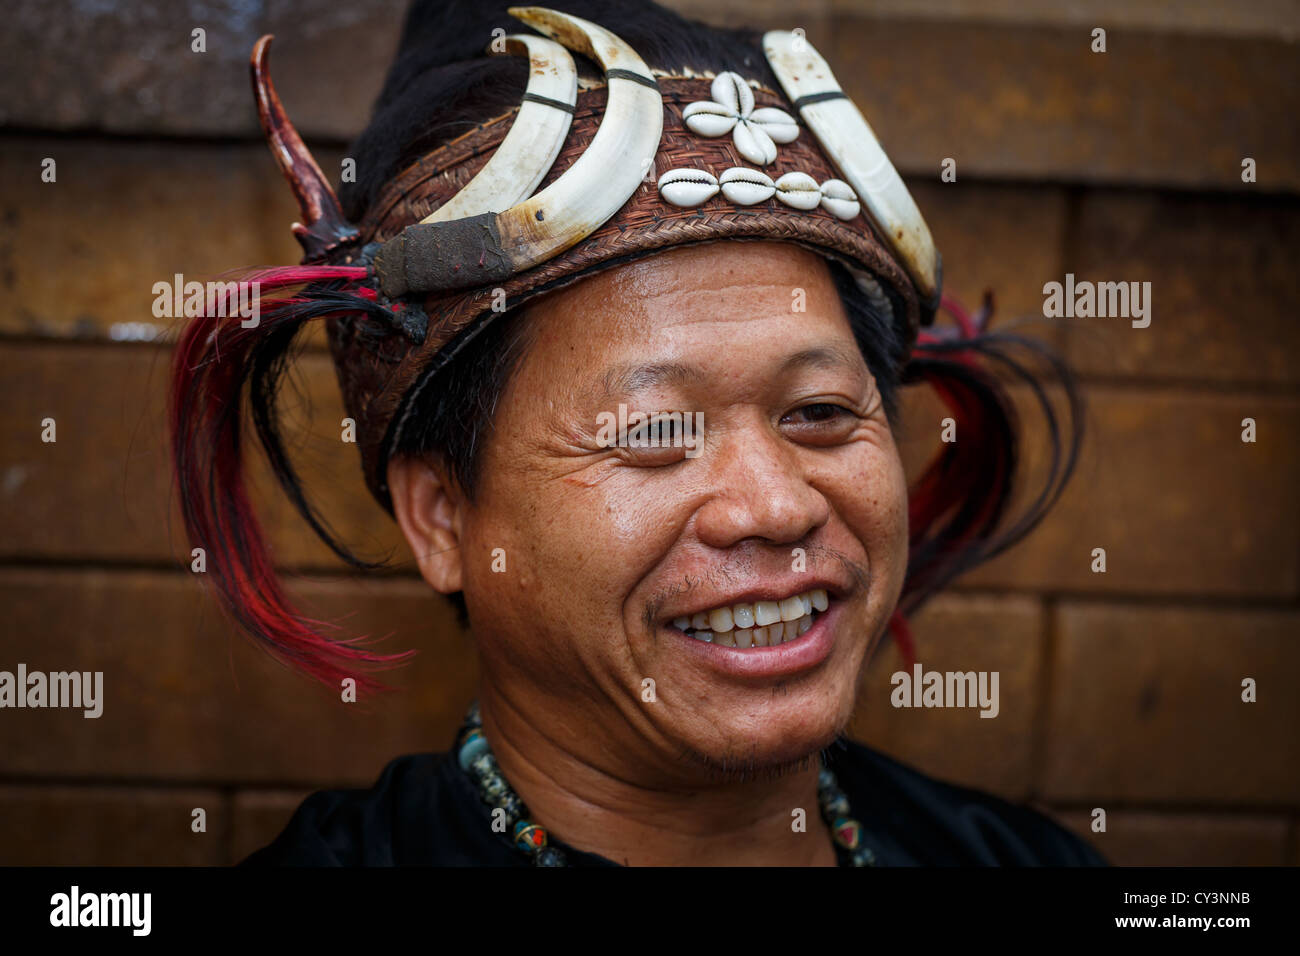 A portrait of a man from the Naga hill tribe people, northern Thailand, Thailand, Asia Stock Photo